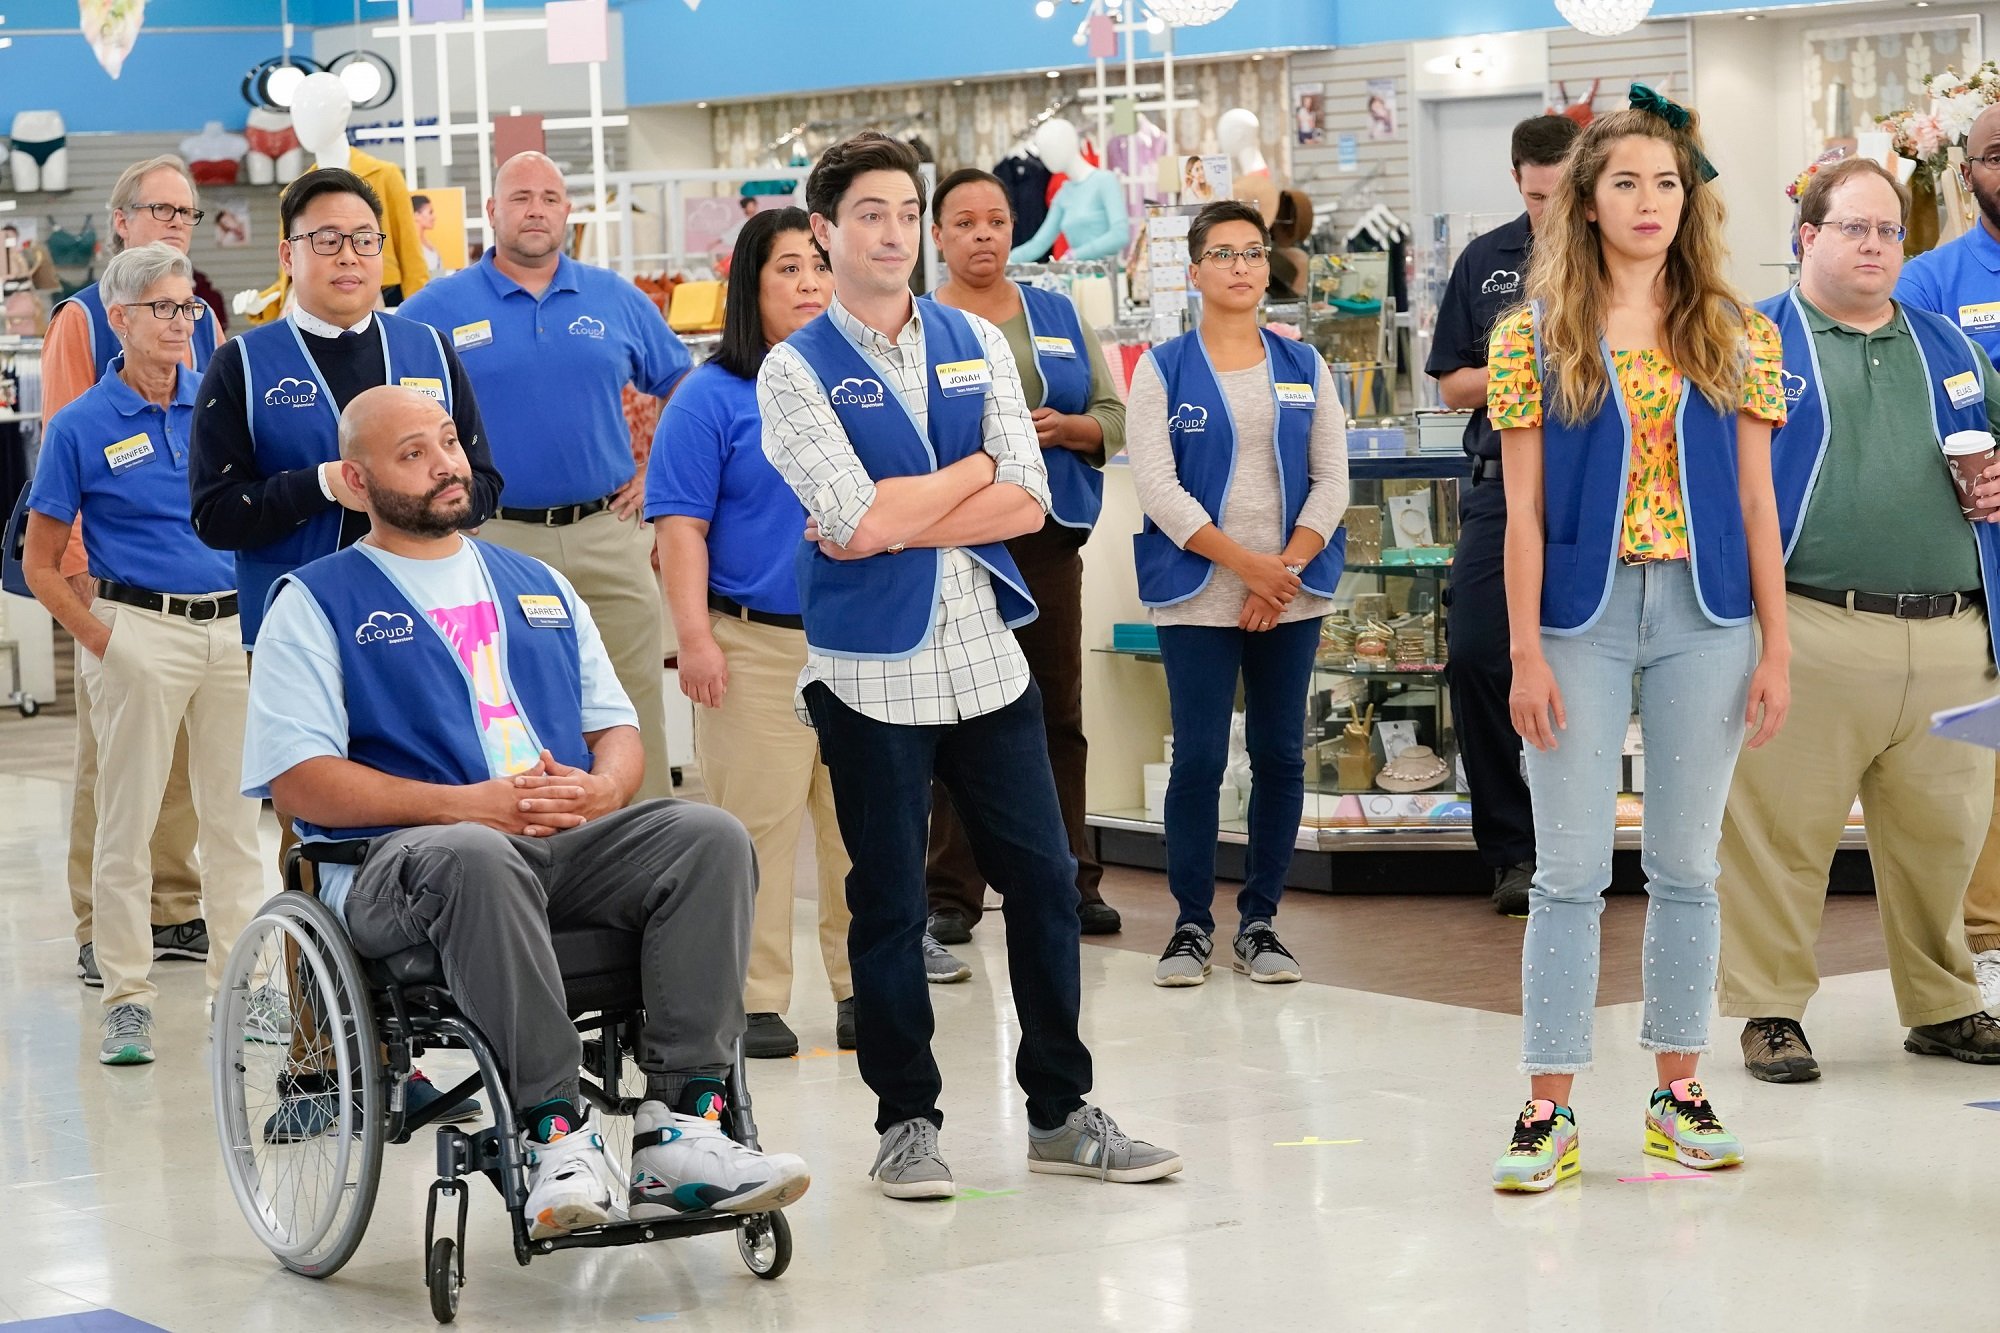 Superstore Is Officially Ending After Season 6